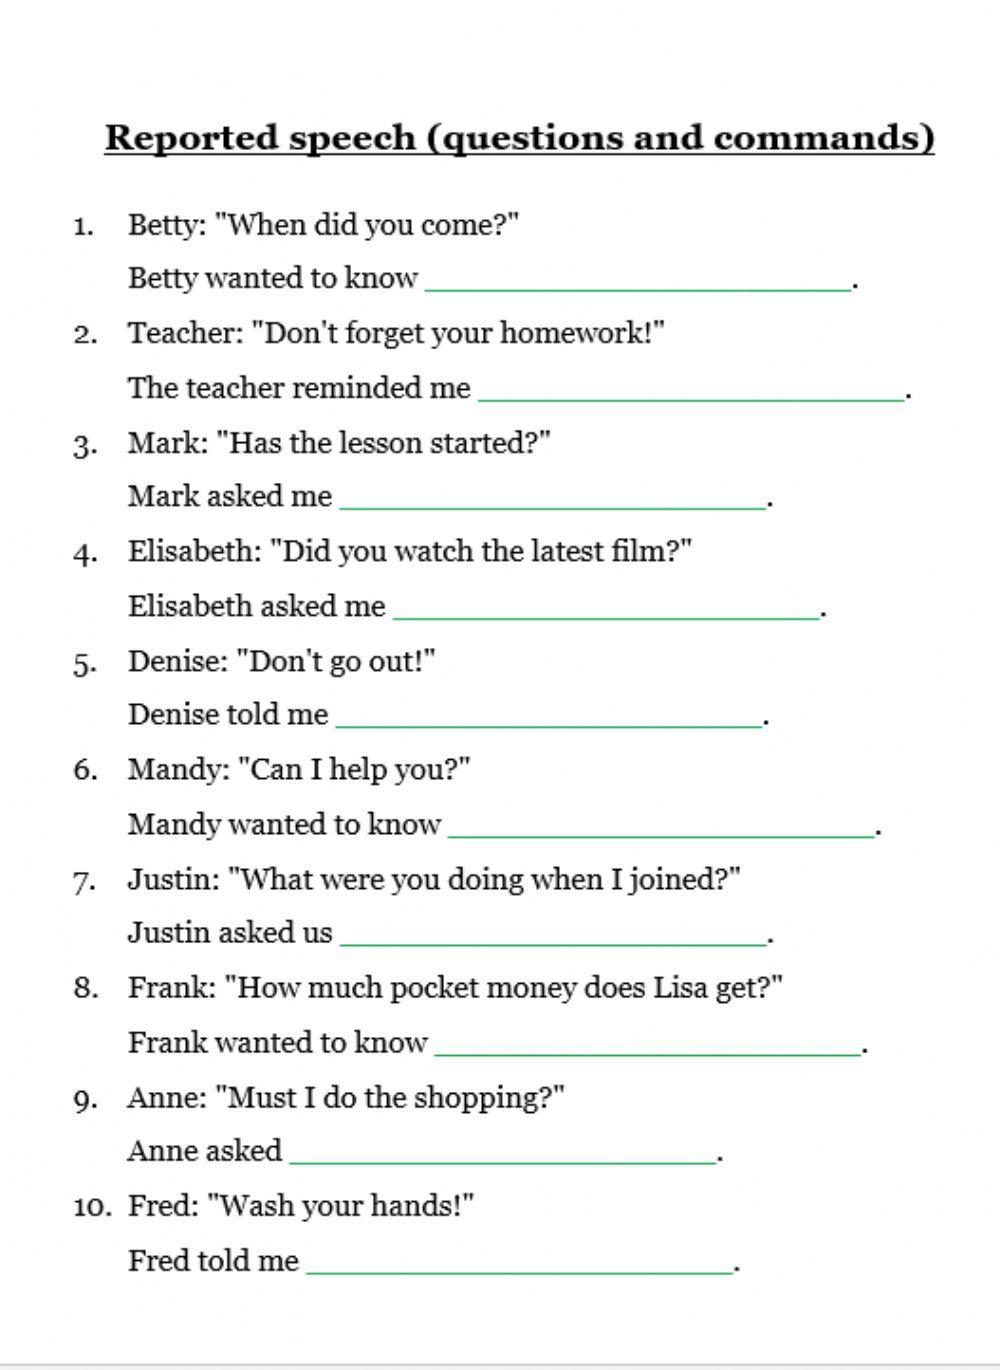 reported speech worksheets for grade 5 with answers